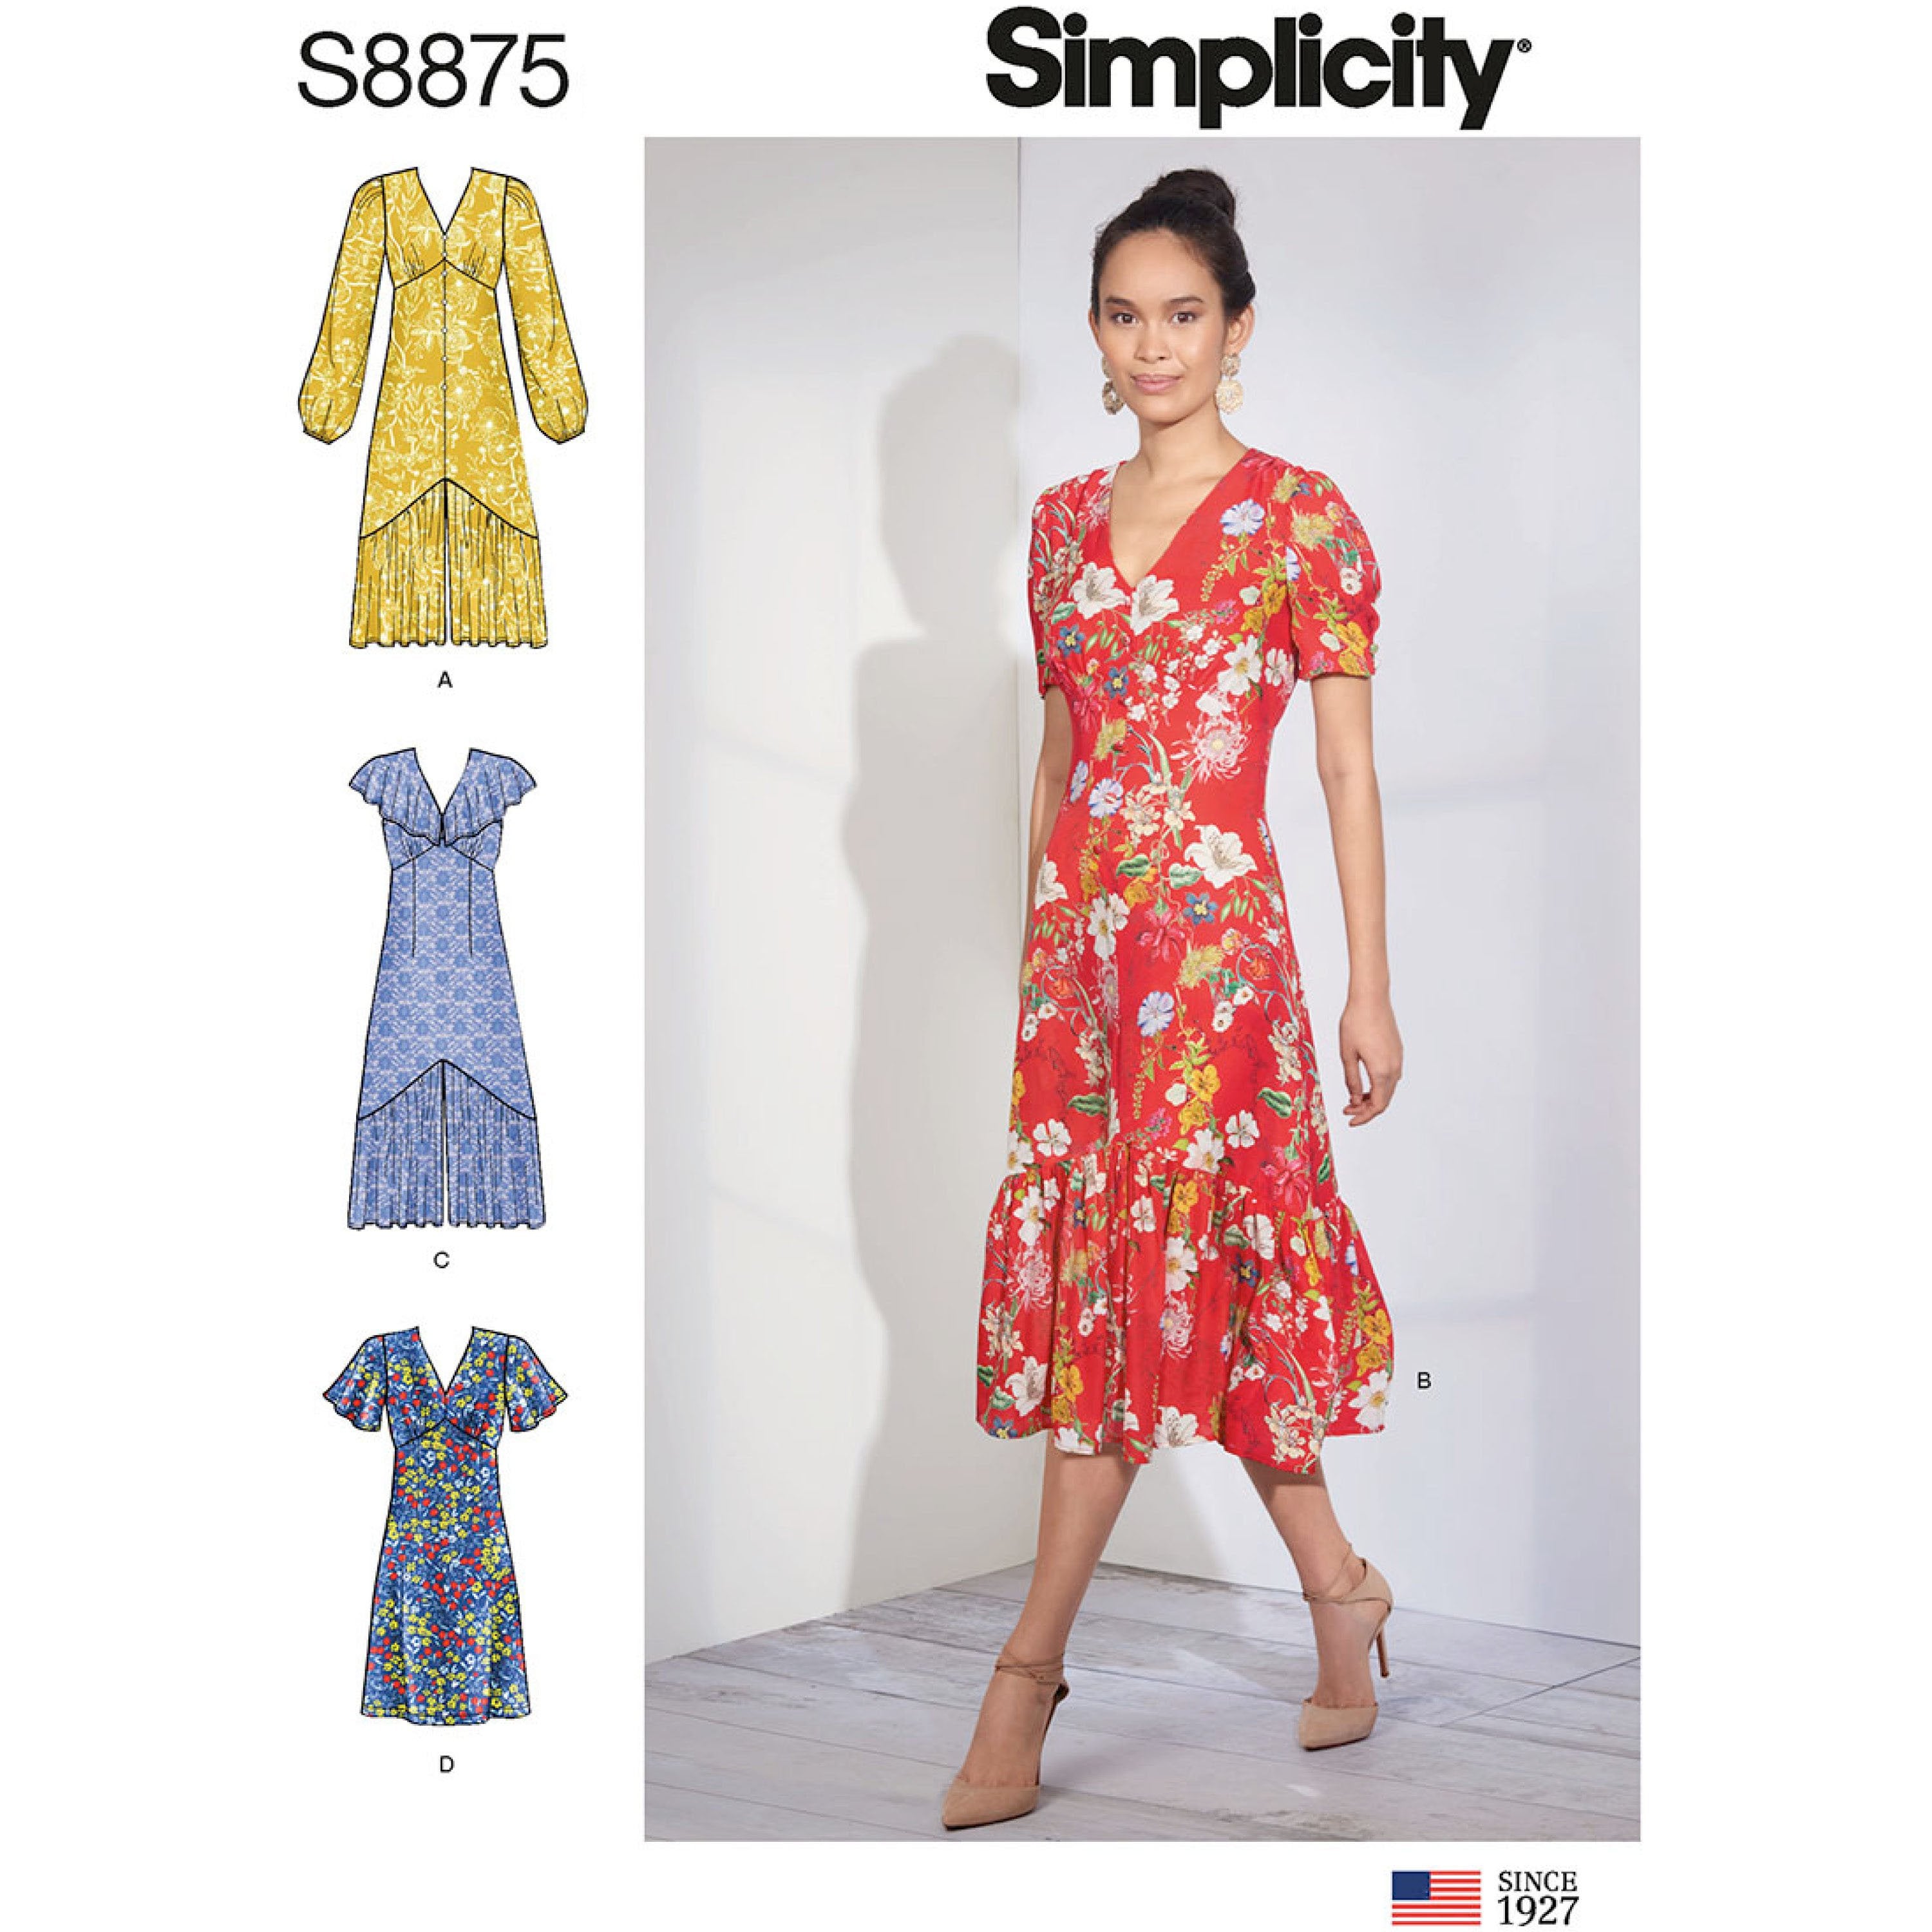 Simplicity 8875 Misses' Dresses Pattern from Jaycotts Sewing Supplies